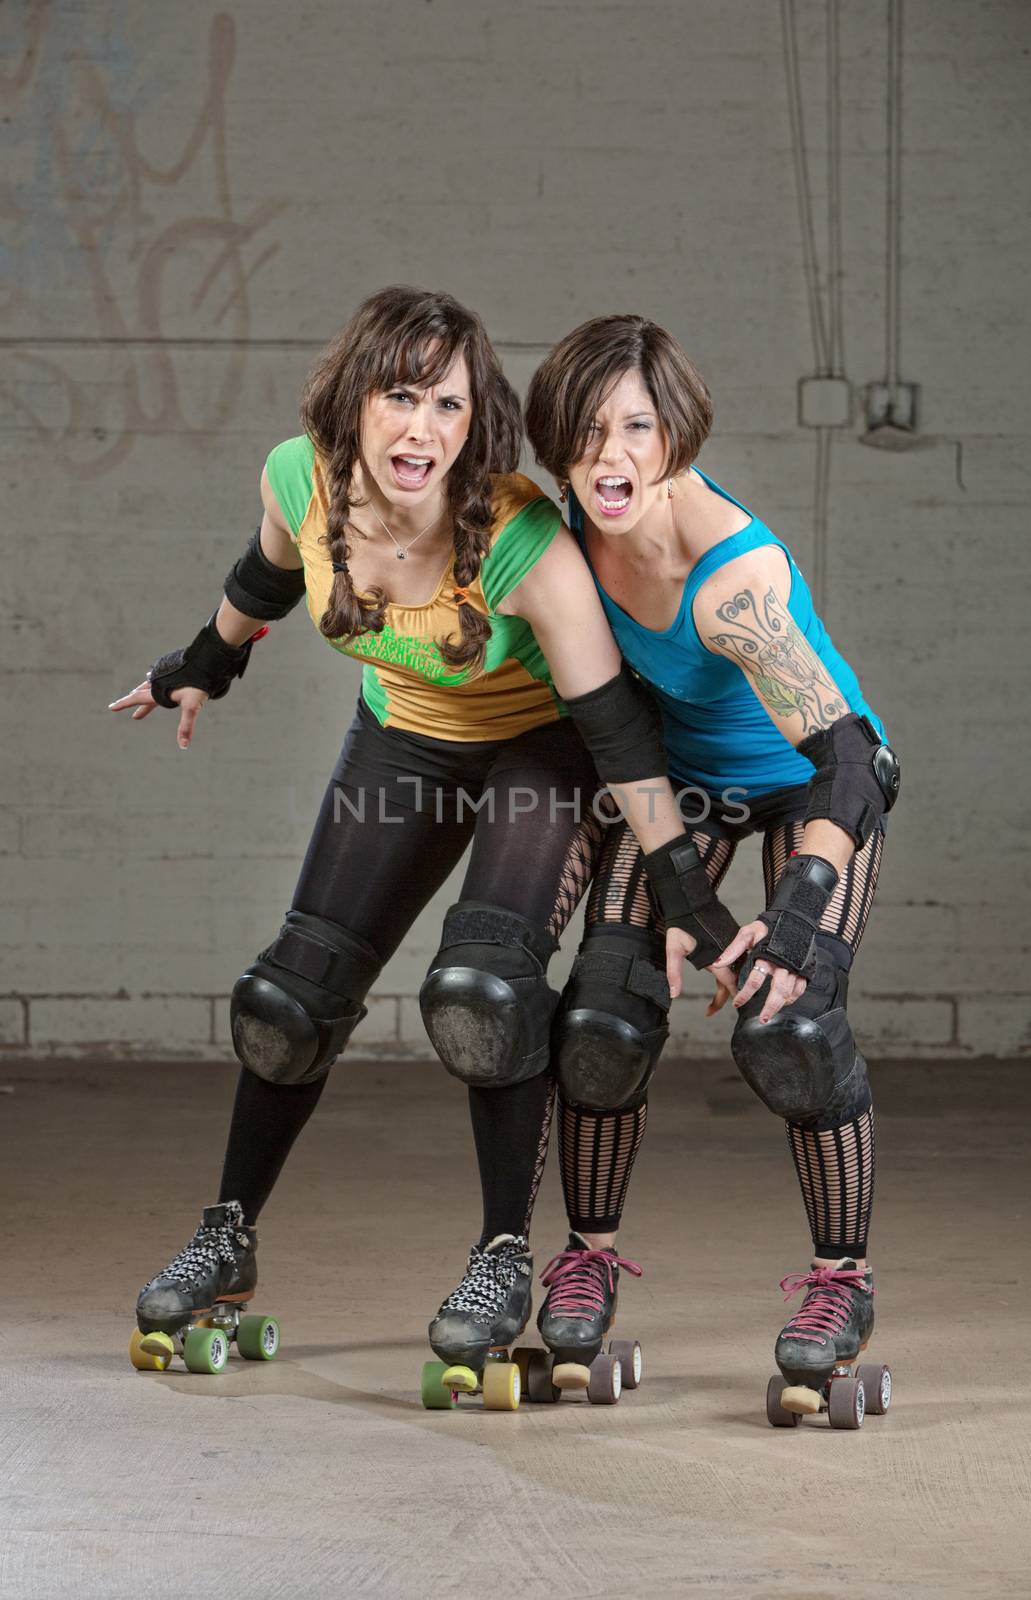 Aggressive women roller derby skaters threatening with a pose